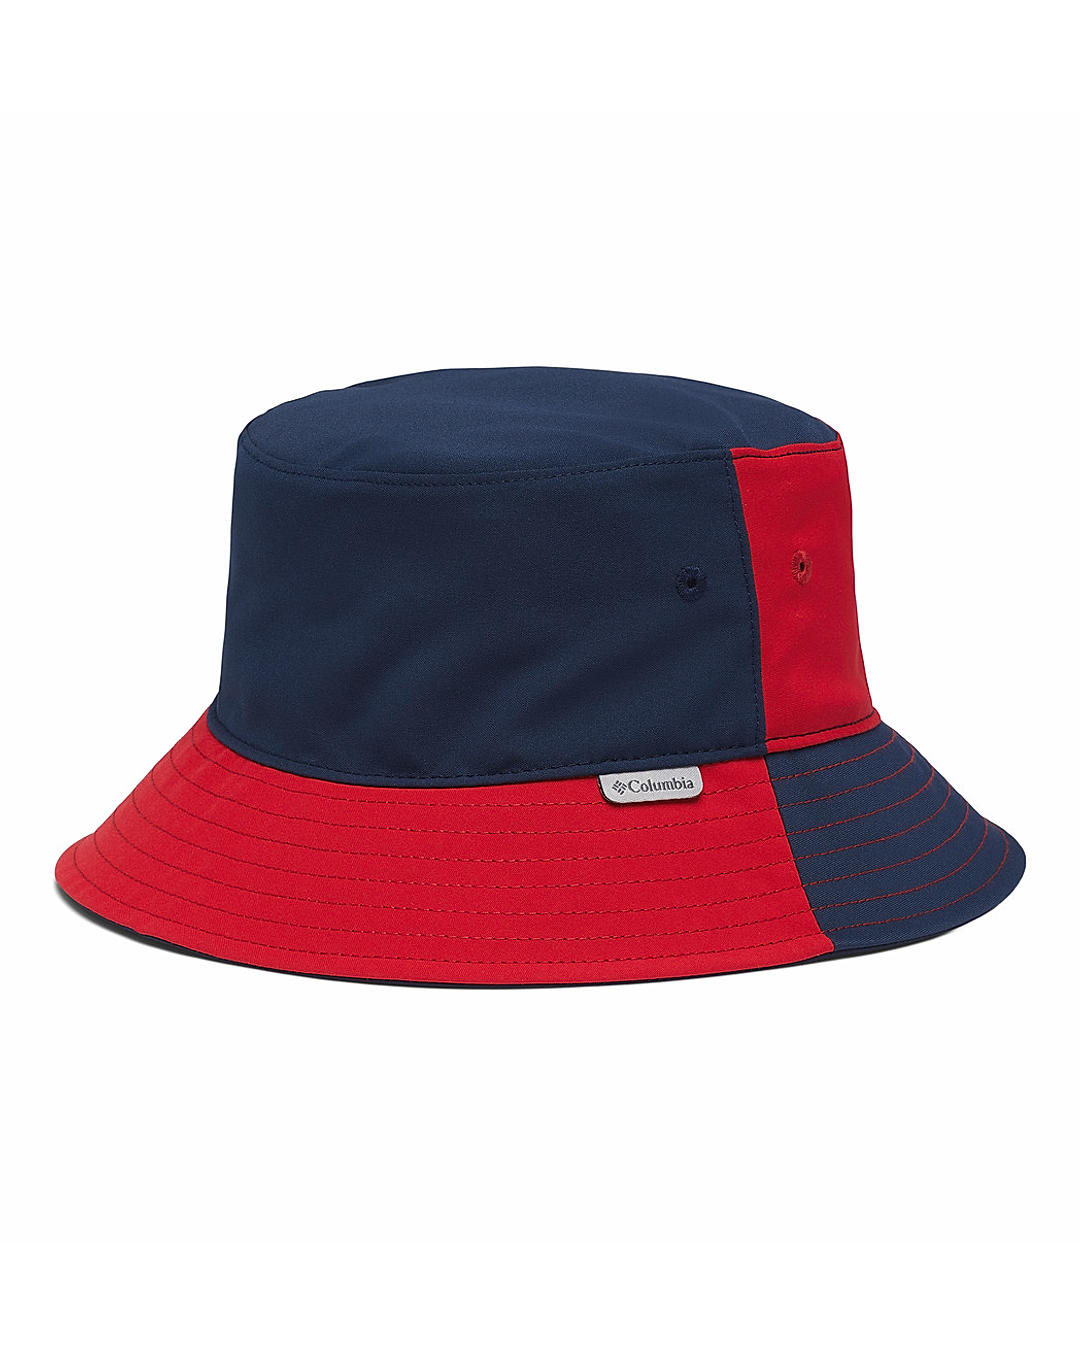 Buy Columbia Blue Columbia Bucket Hat For Kids Online at